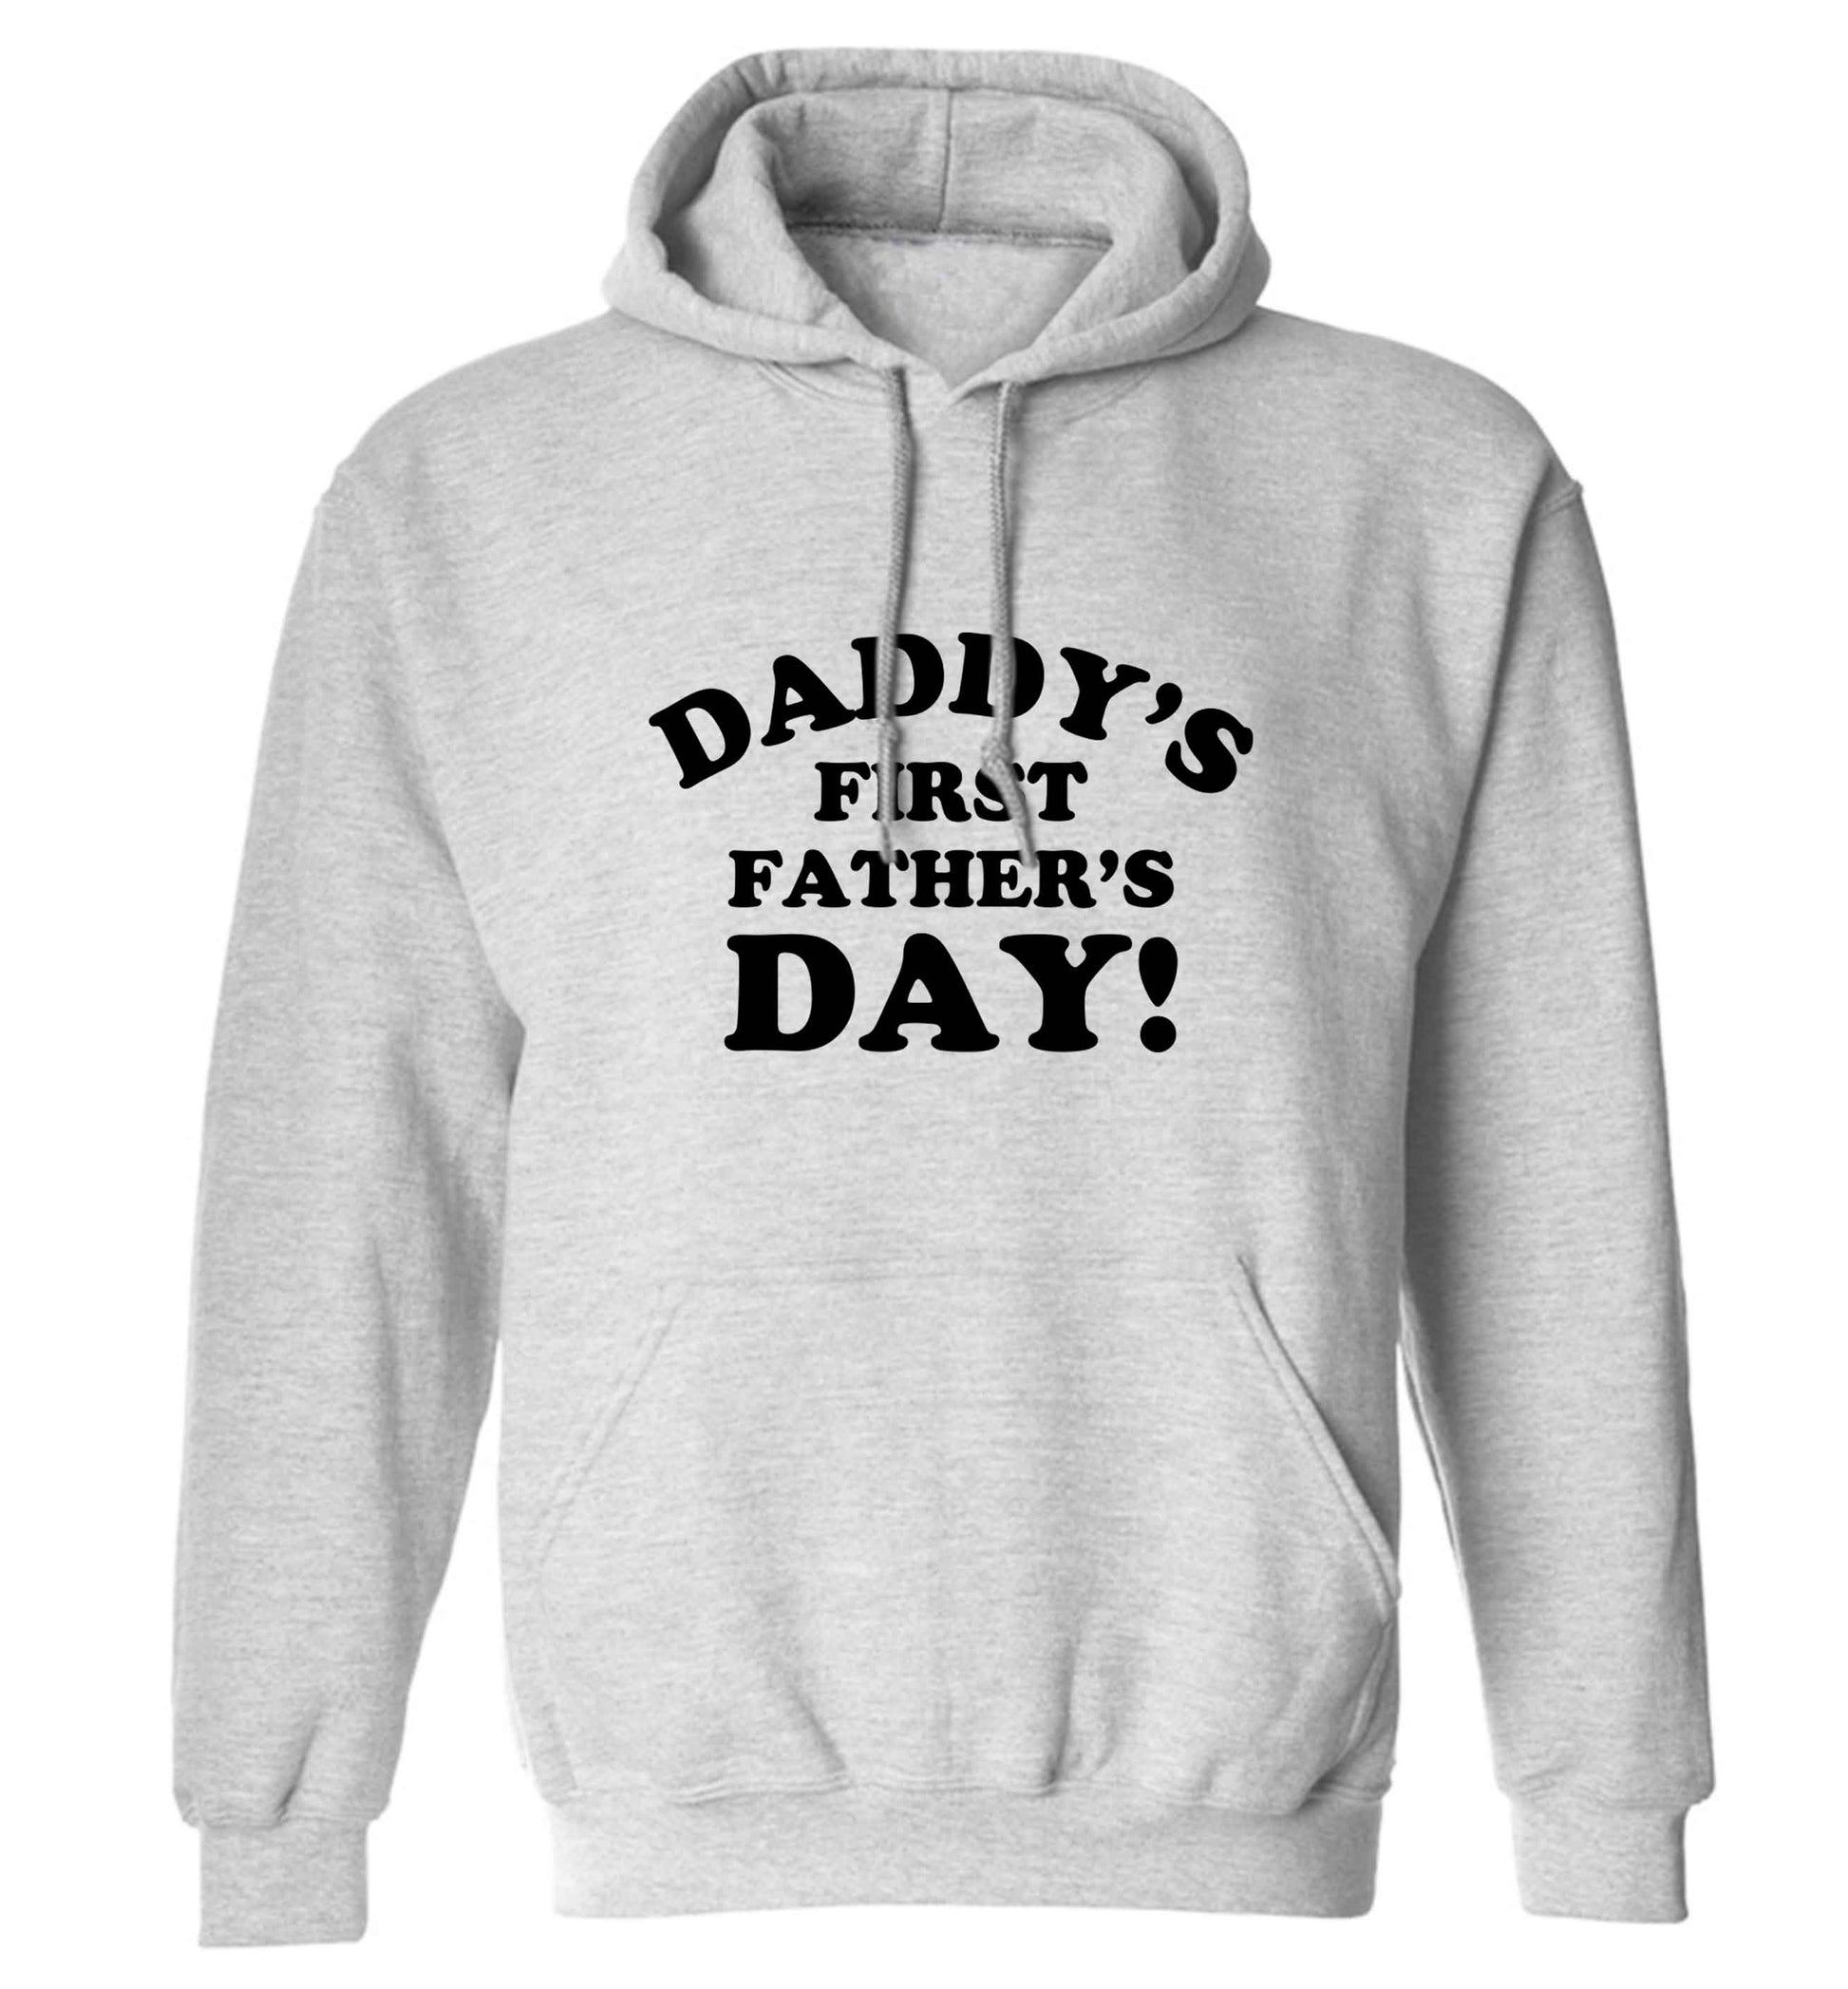 Daddy's first father's day adults unisex grey hoodie 2XL